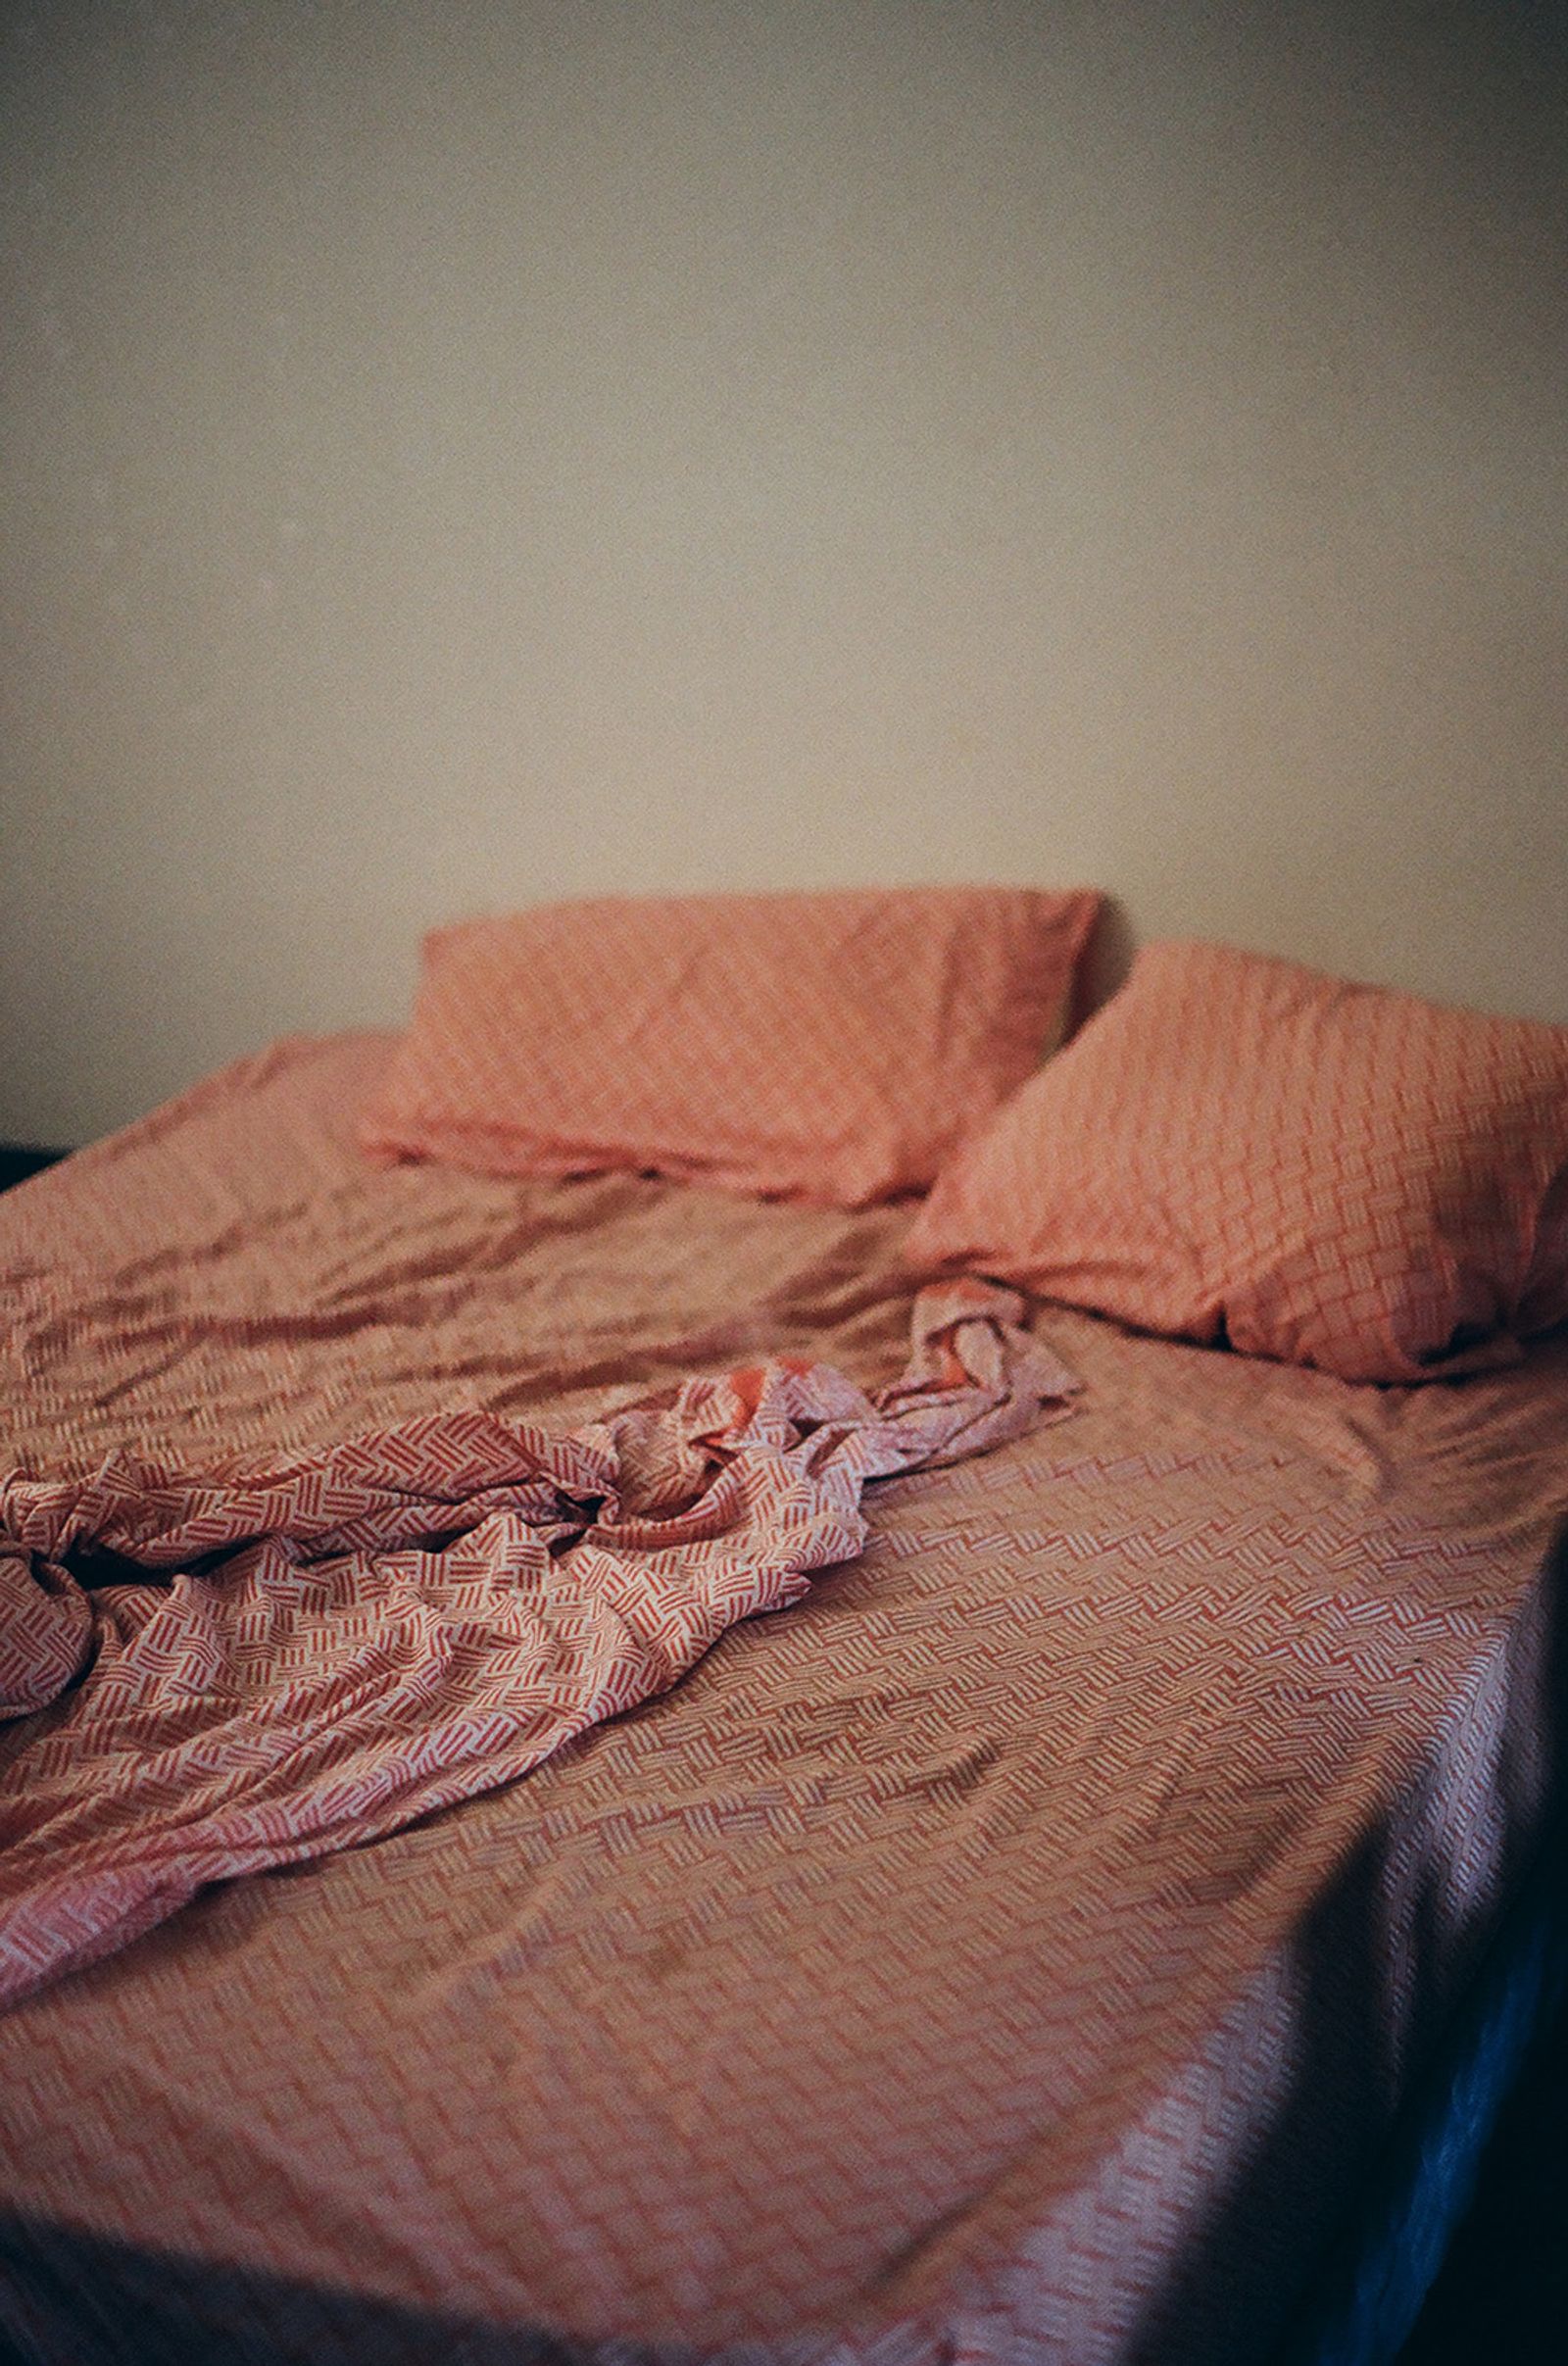 © Violeta Capasso - Image from the the cost photography project